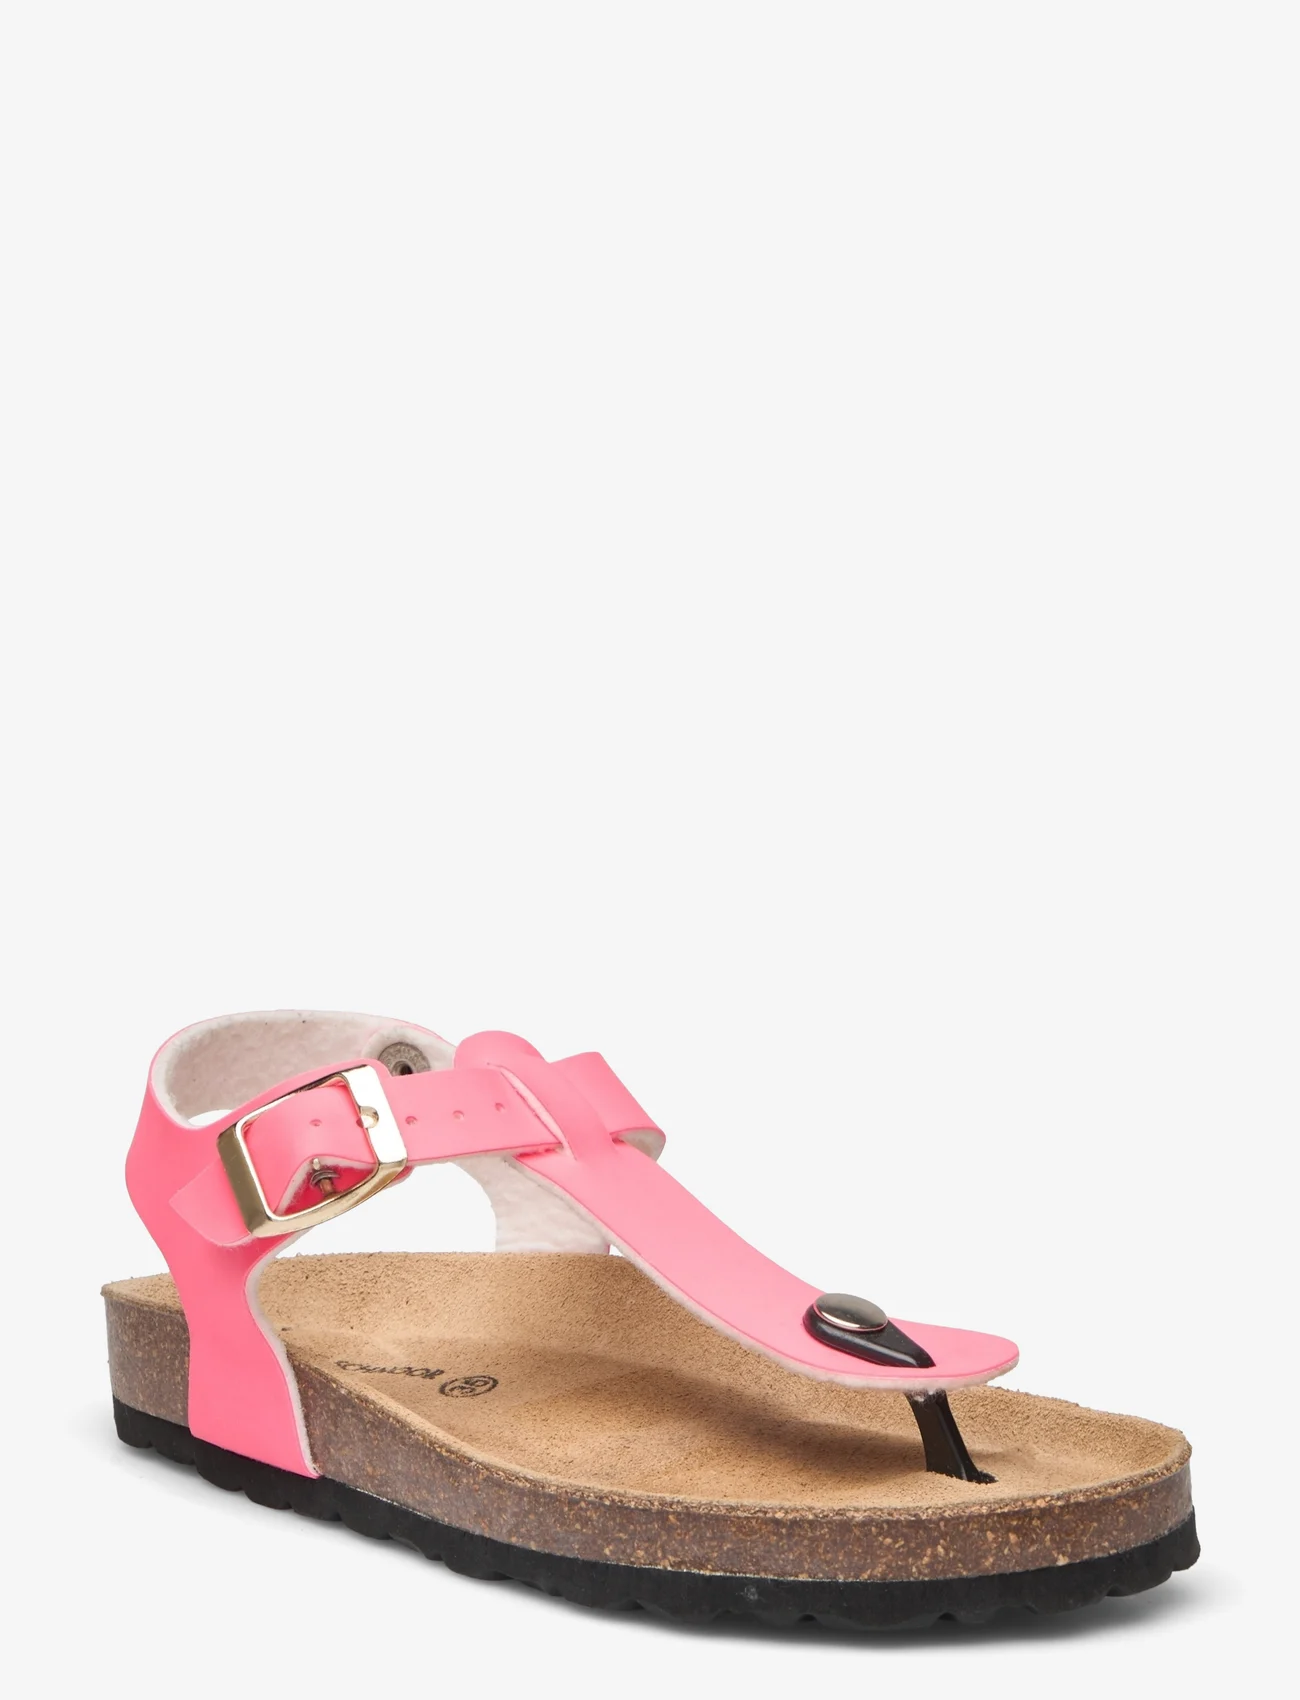 Sofie Schnoor Baby and Kids - Sandal lacquer - vasaros pasiūlymai - coral pink - 0